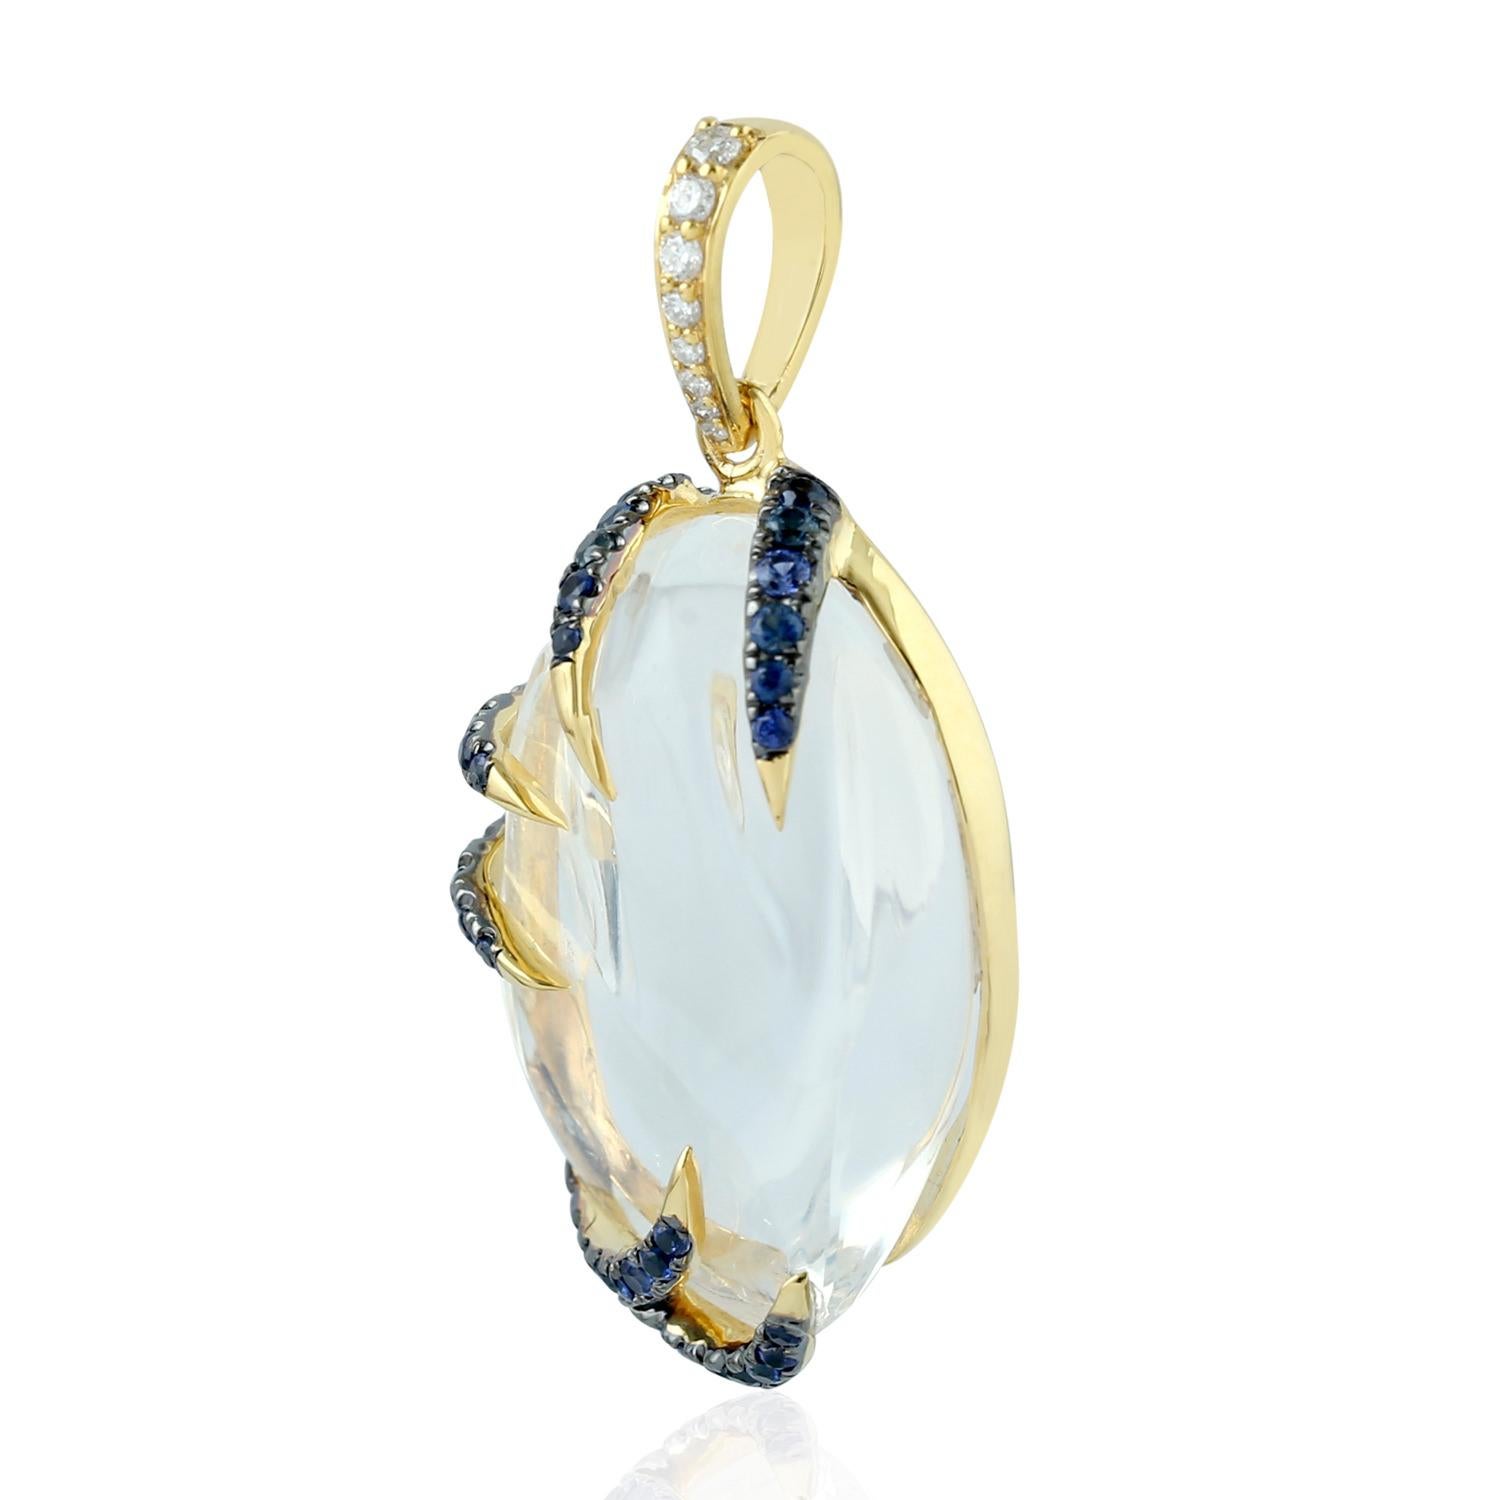 This pendant has been meticulously crafted from 18-karat gold. It is hand set with 20.1 carats Opal, .80 carats blue sapphire & .09 carats of sparkling diamonds.

FOLLOW  MEGHNA JEWELS storefront to view the latest collection & exclusive pieces. 